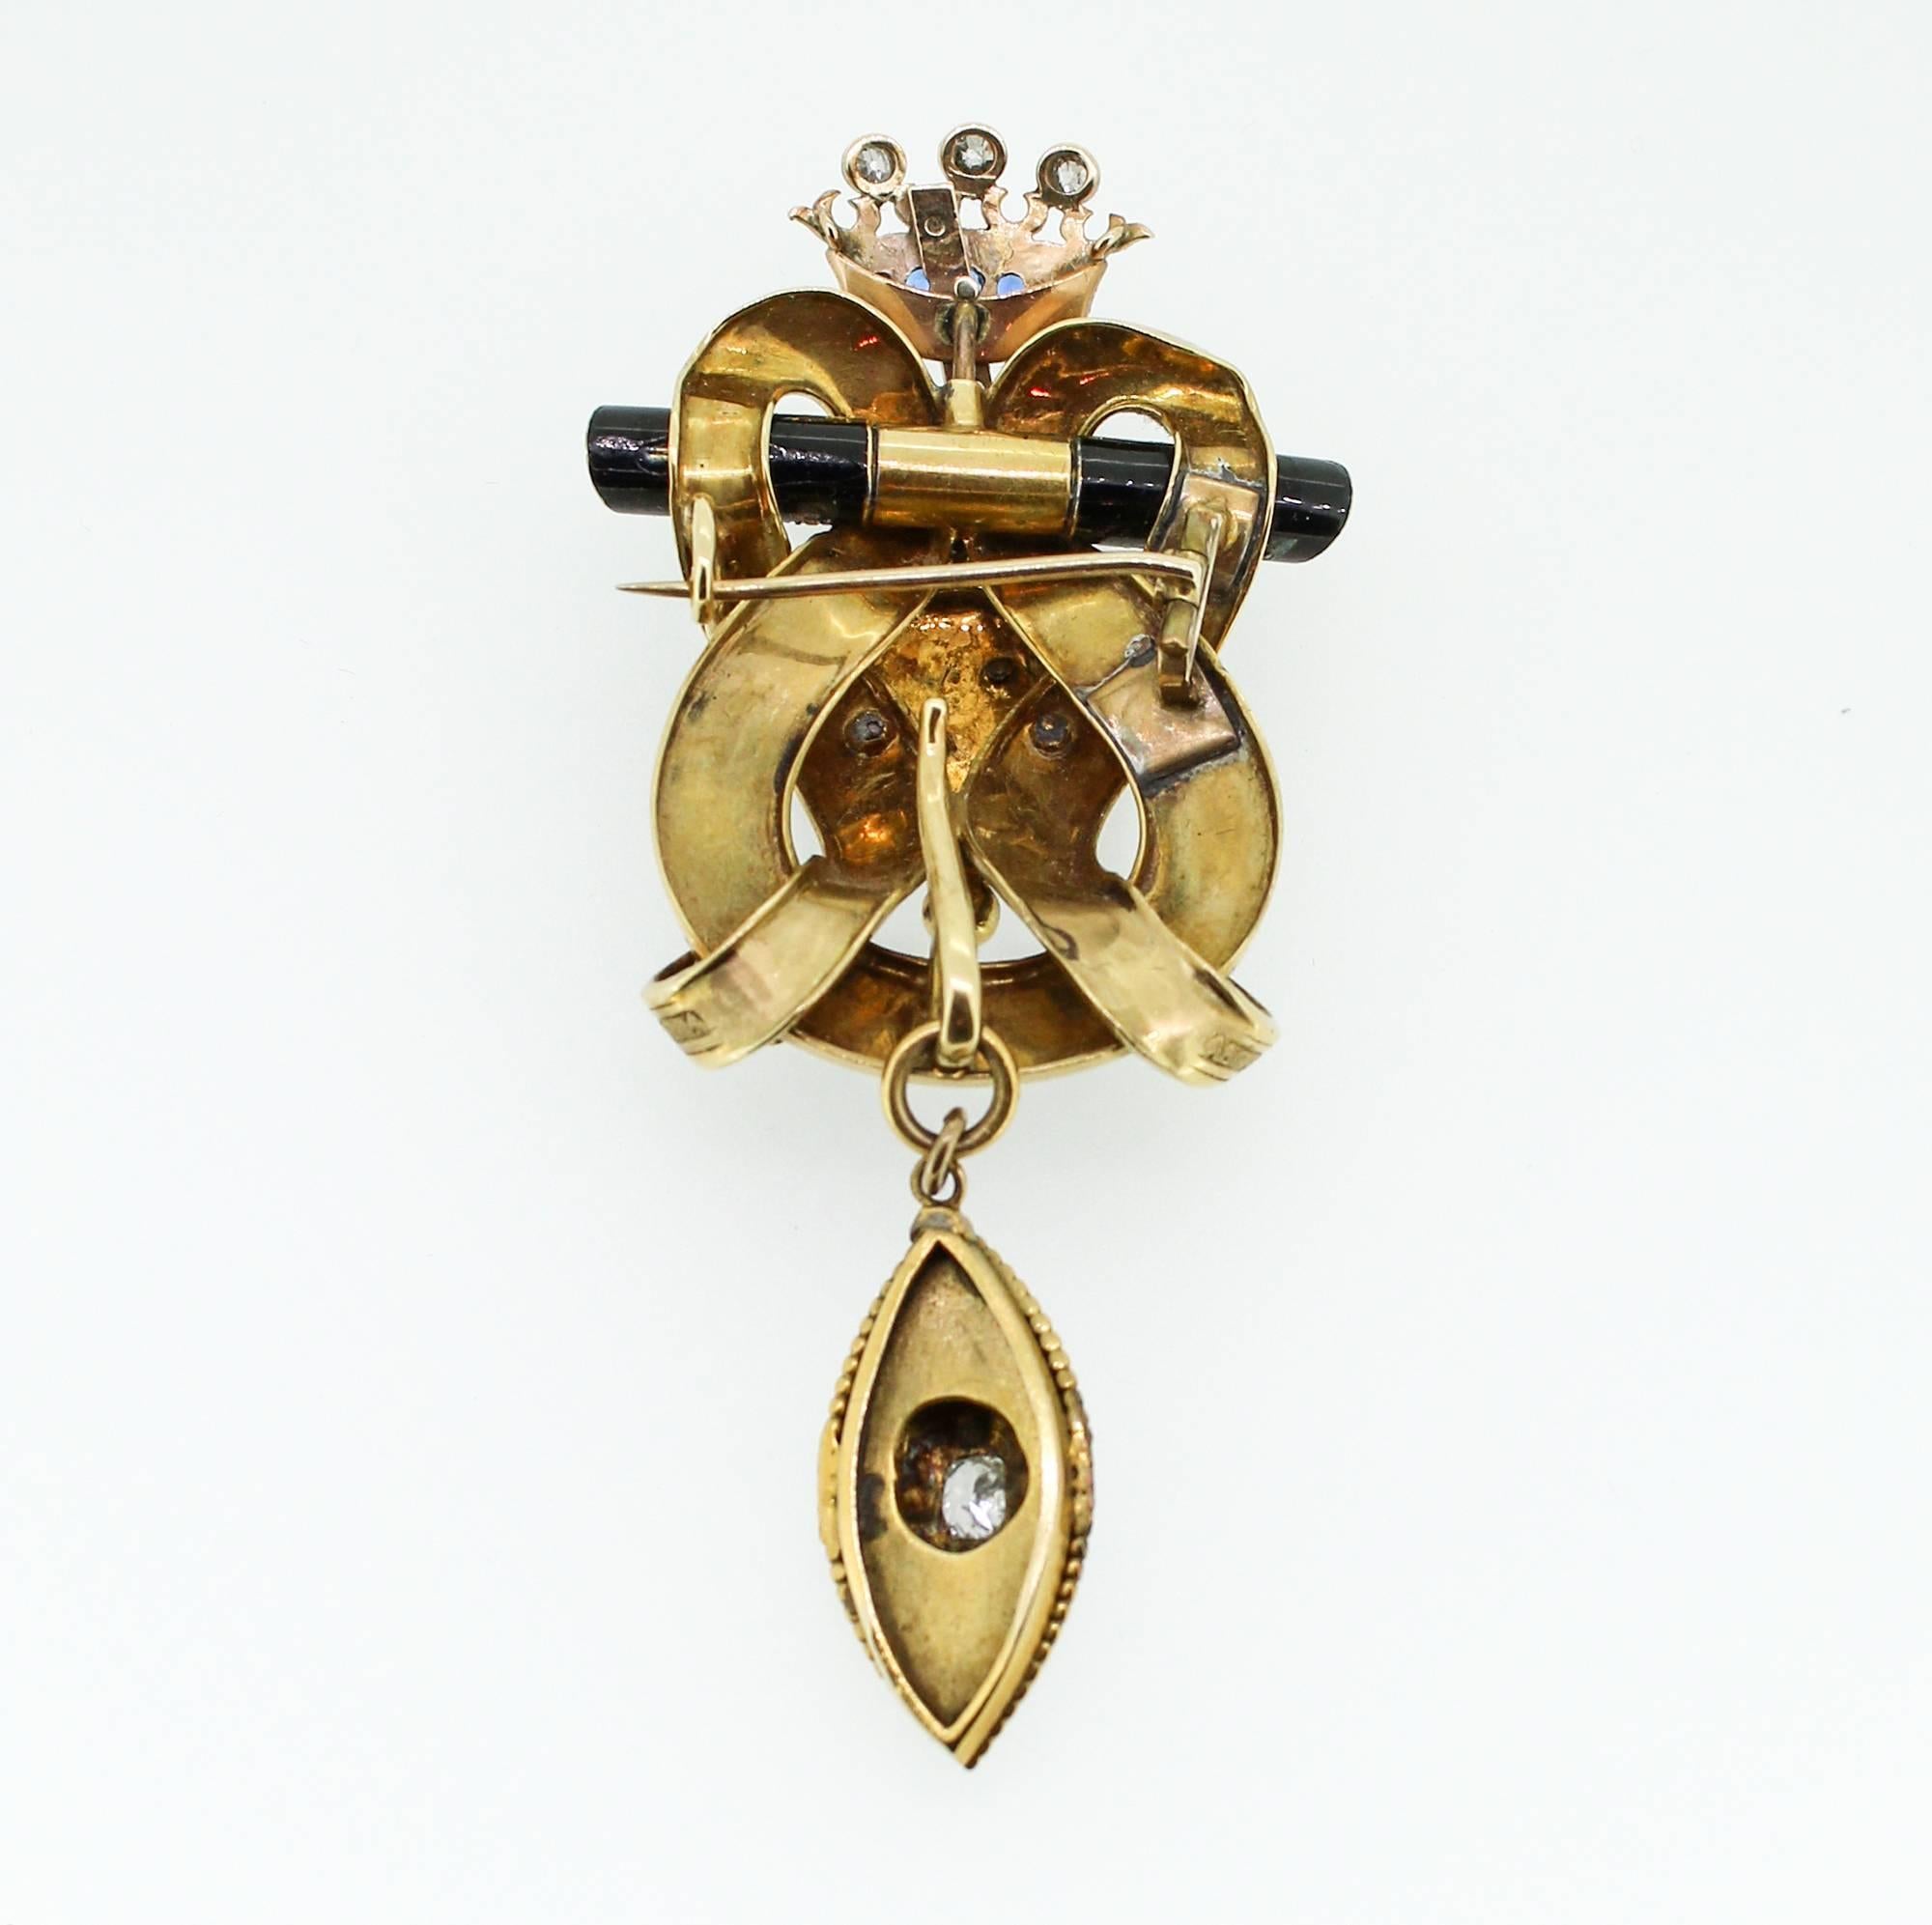 This antique, late Georgian yellow gold and enamel brooch contains 32 primitive cut diamonds (rose cut and old cushion cut), estimated to weigh a total of 1.25 carats. The crown at the top of the pin also contains 5 very clean and vibrant synthetic